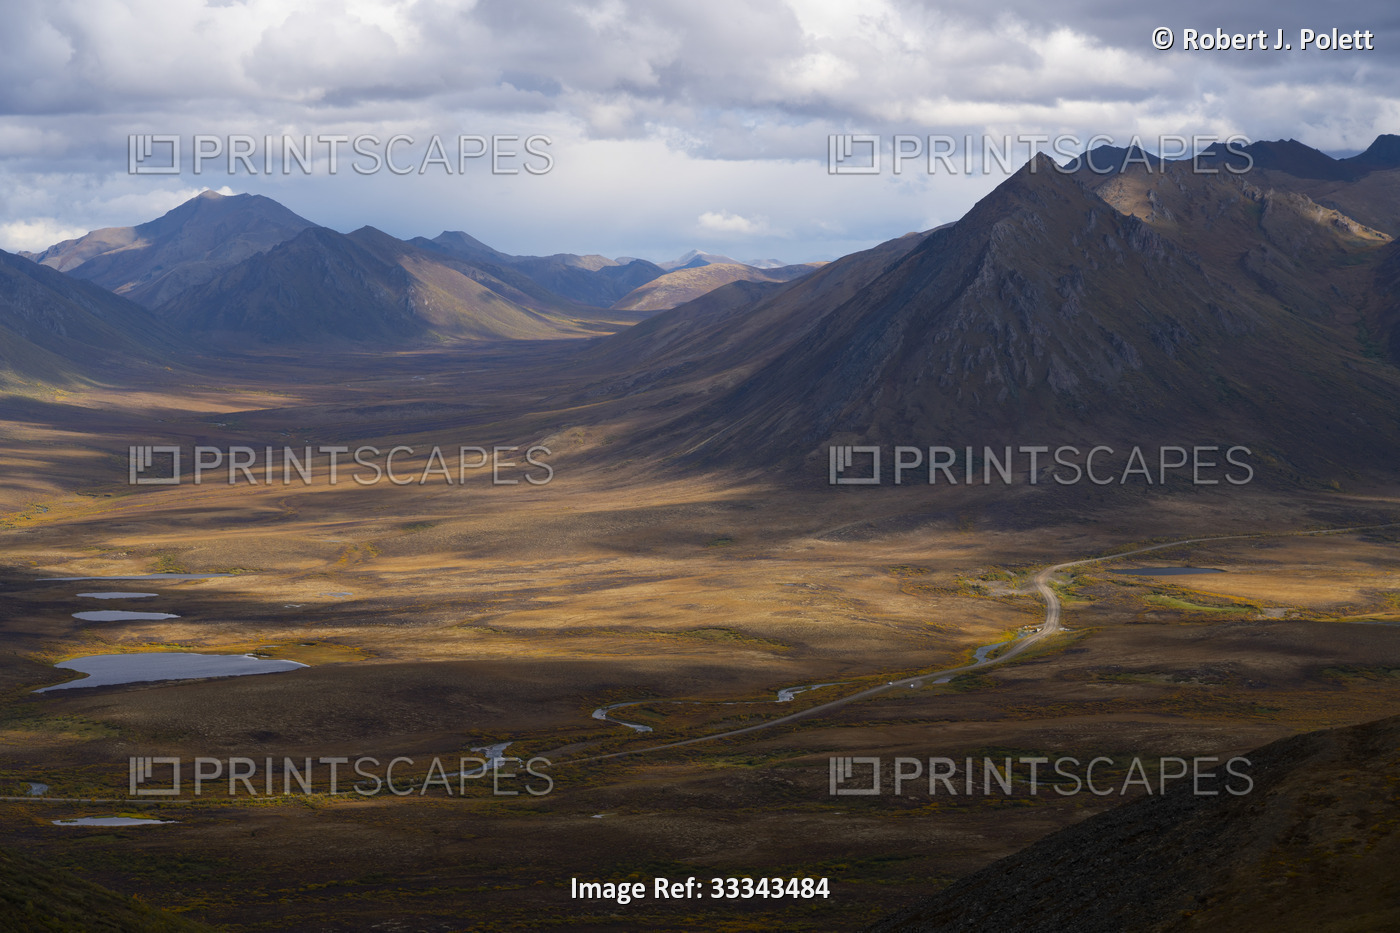 Awe-inspiring overview of the mountains and valleys along the Dempster Highway ...